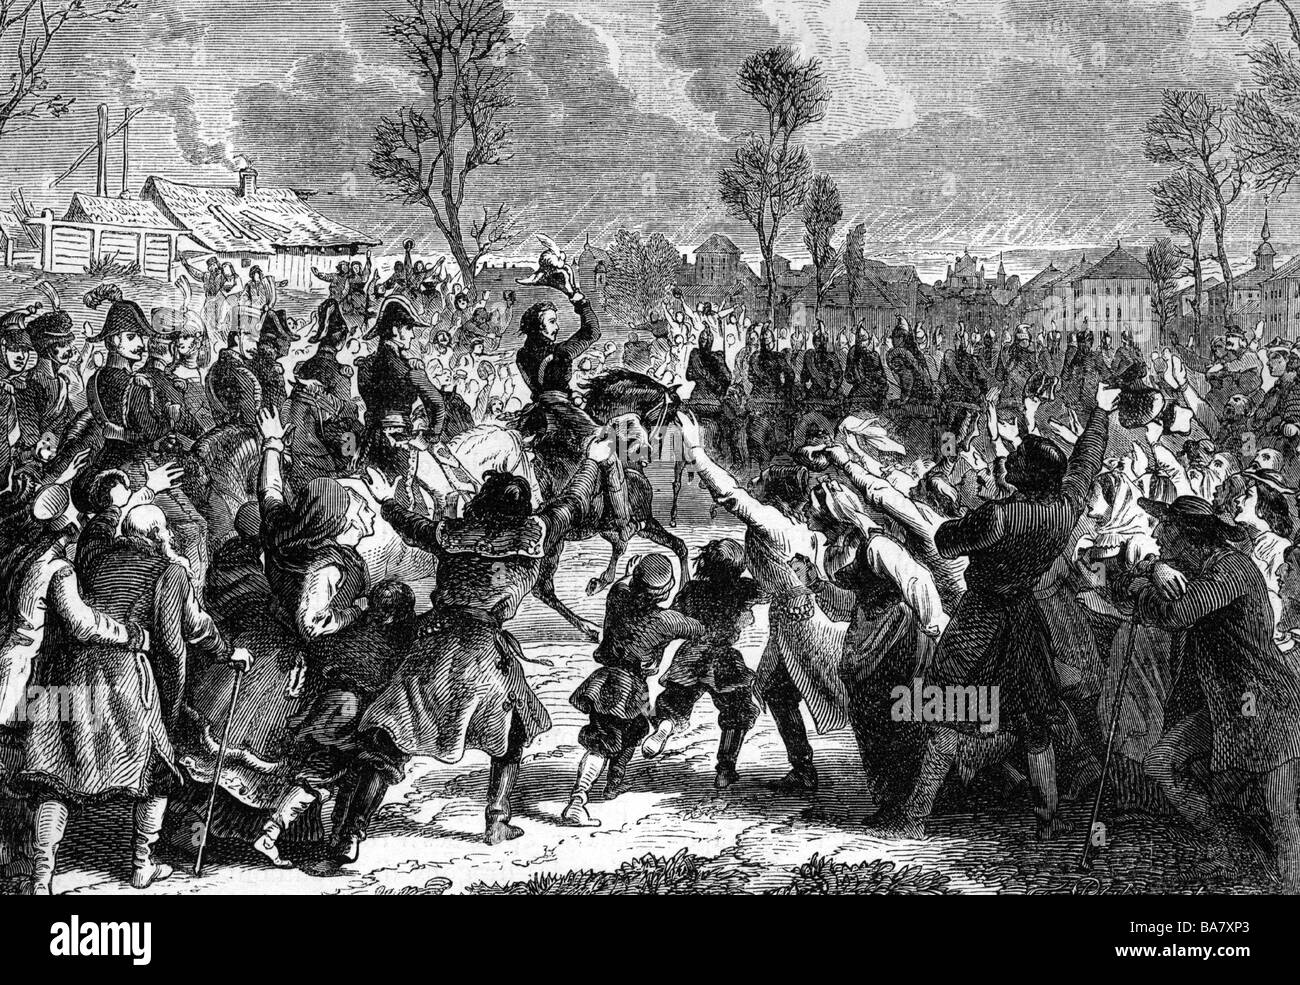 events, War of the Forth Coalition 1806 - 1807, French troops led by Marshal Joachim Murat entering Warsaw, 28.11.1806, wood engraving, 19th century, Napoleonic Wars, Poland, cavalry, cheering, crowd, historic, historical, people, Stock Photo